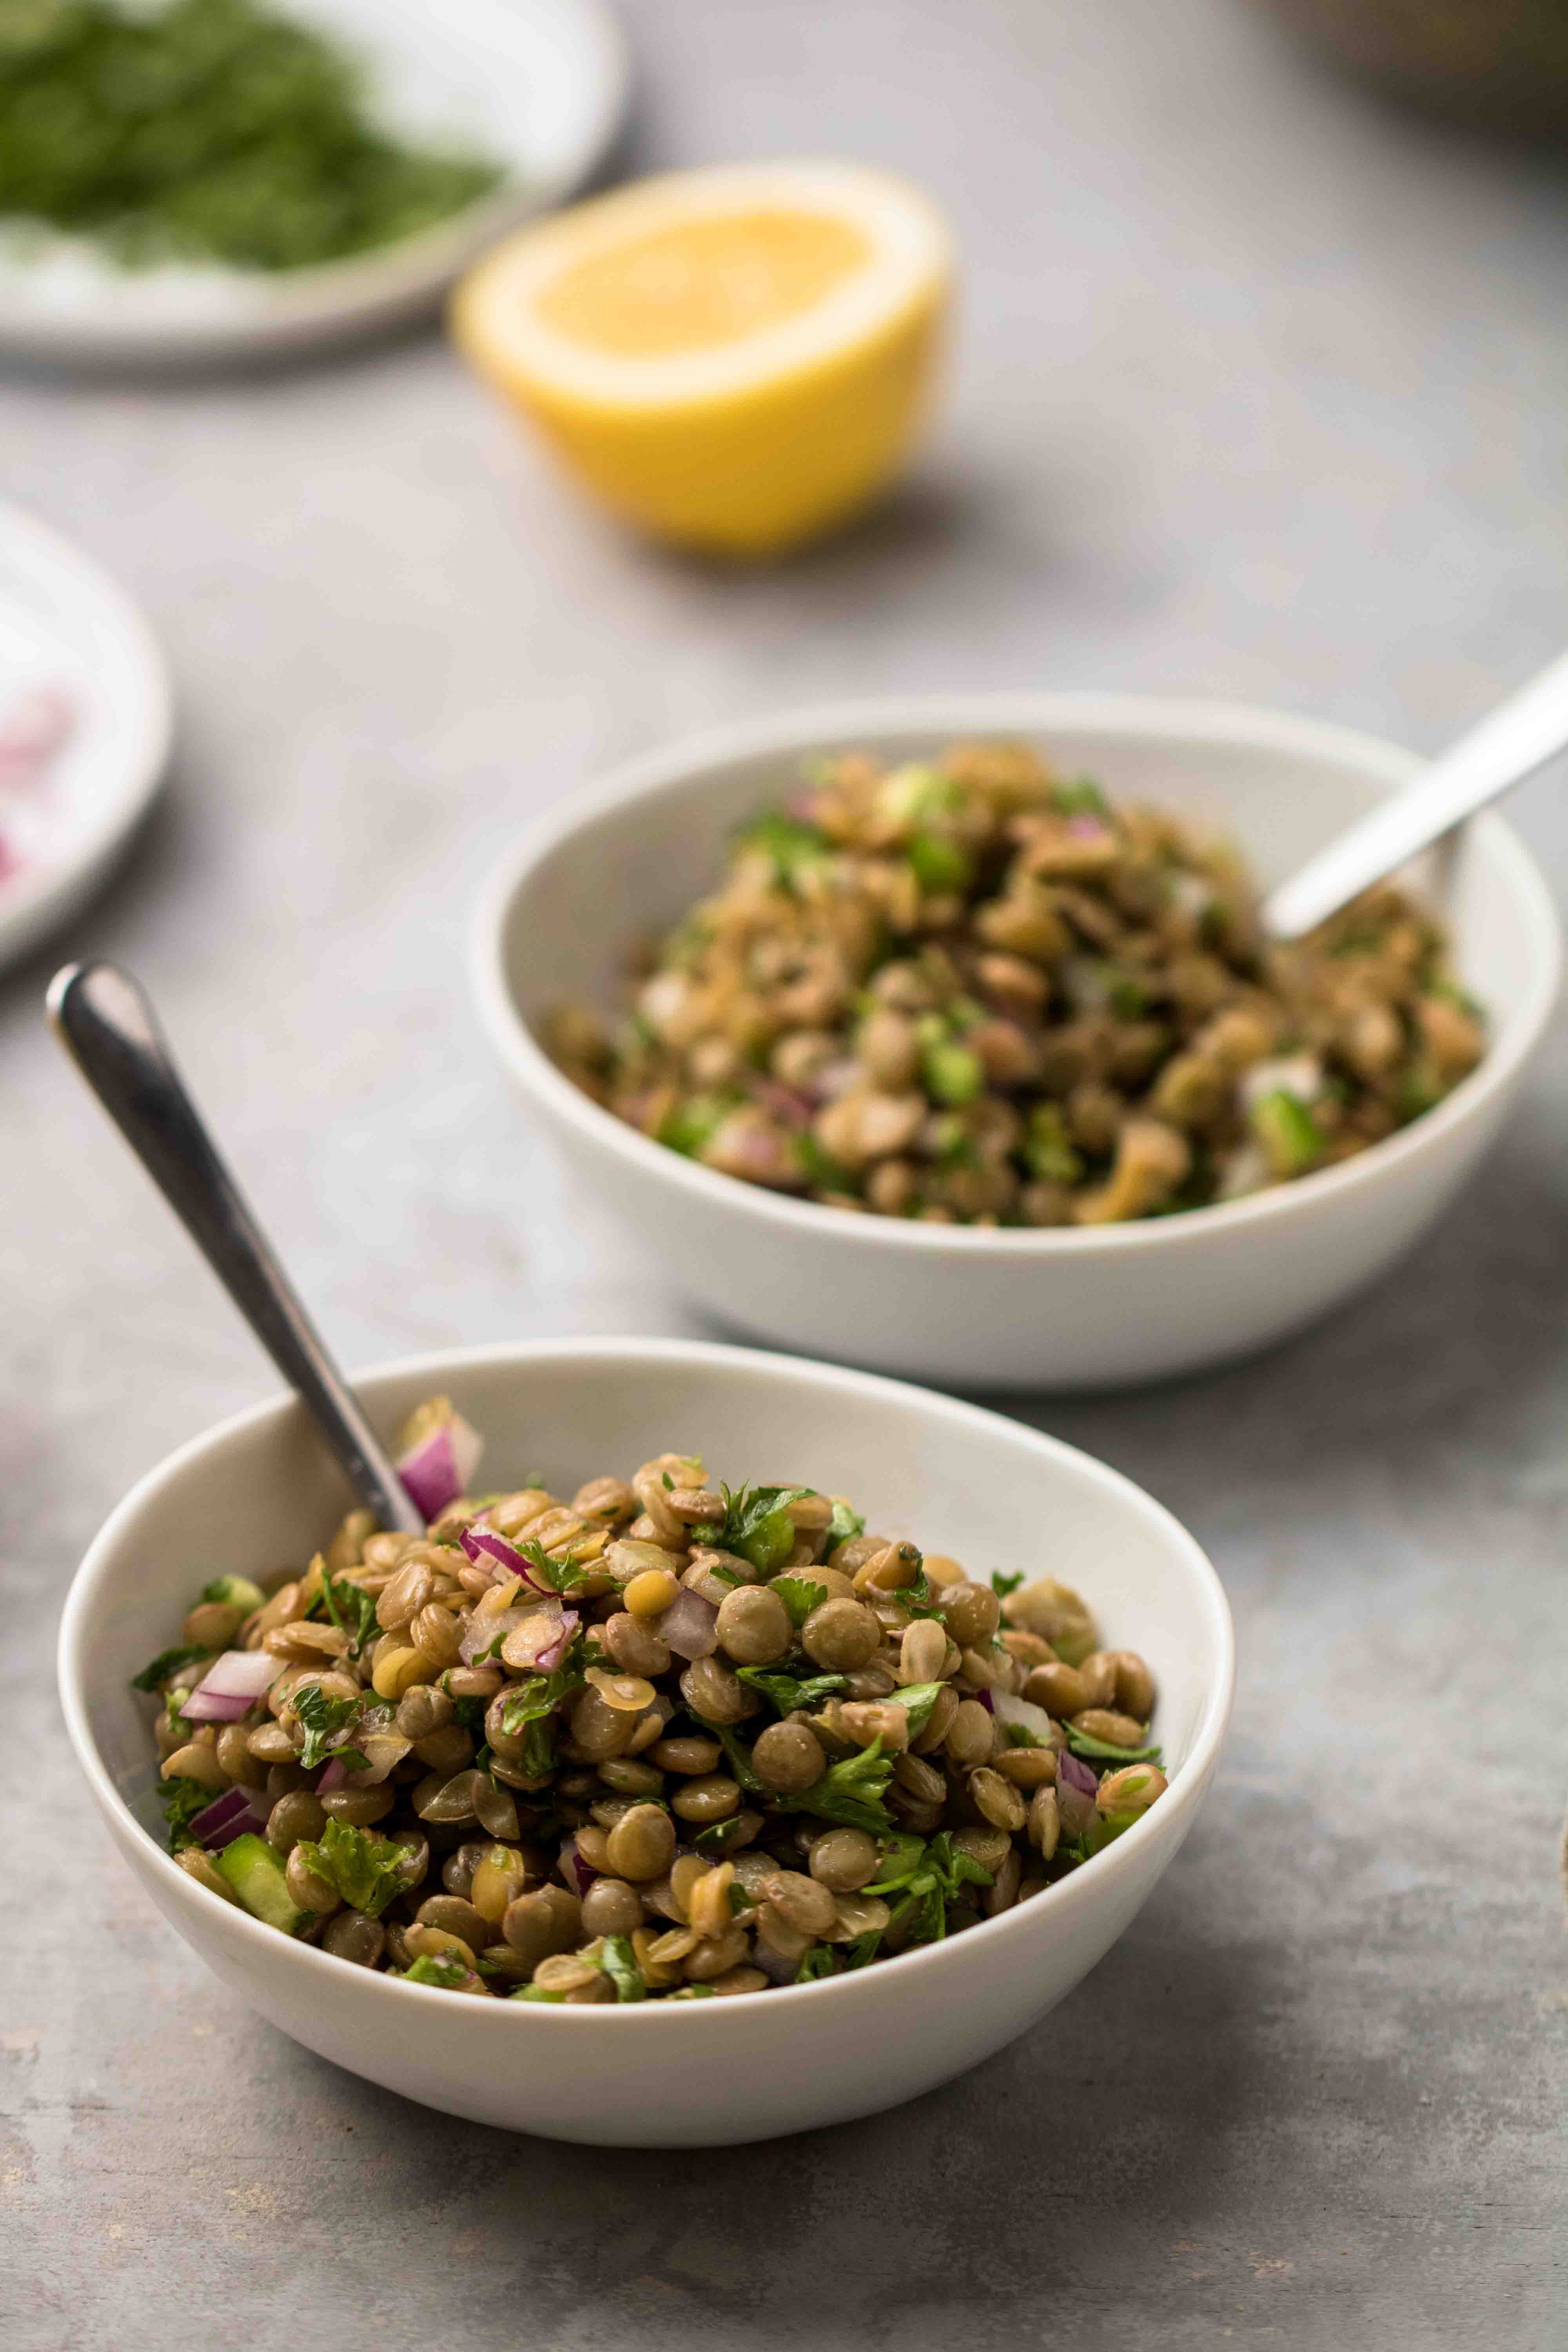 A Quick and Healthy Mediterranean Lentil Salad | Lifestyle of a Foodie